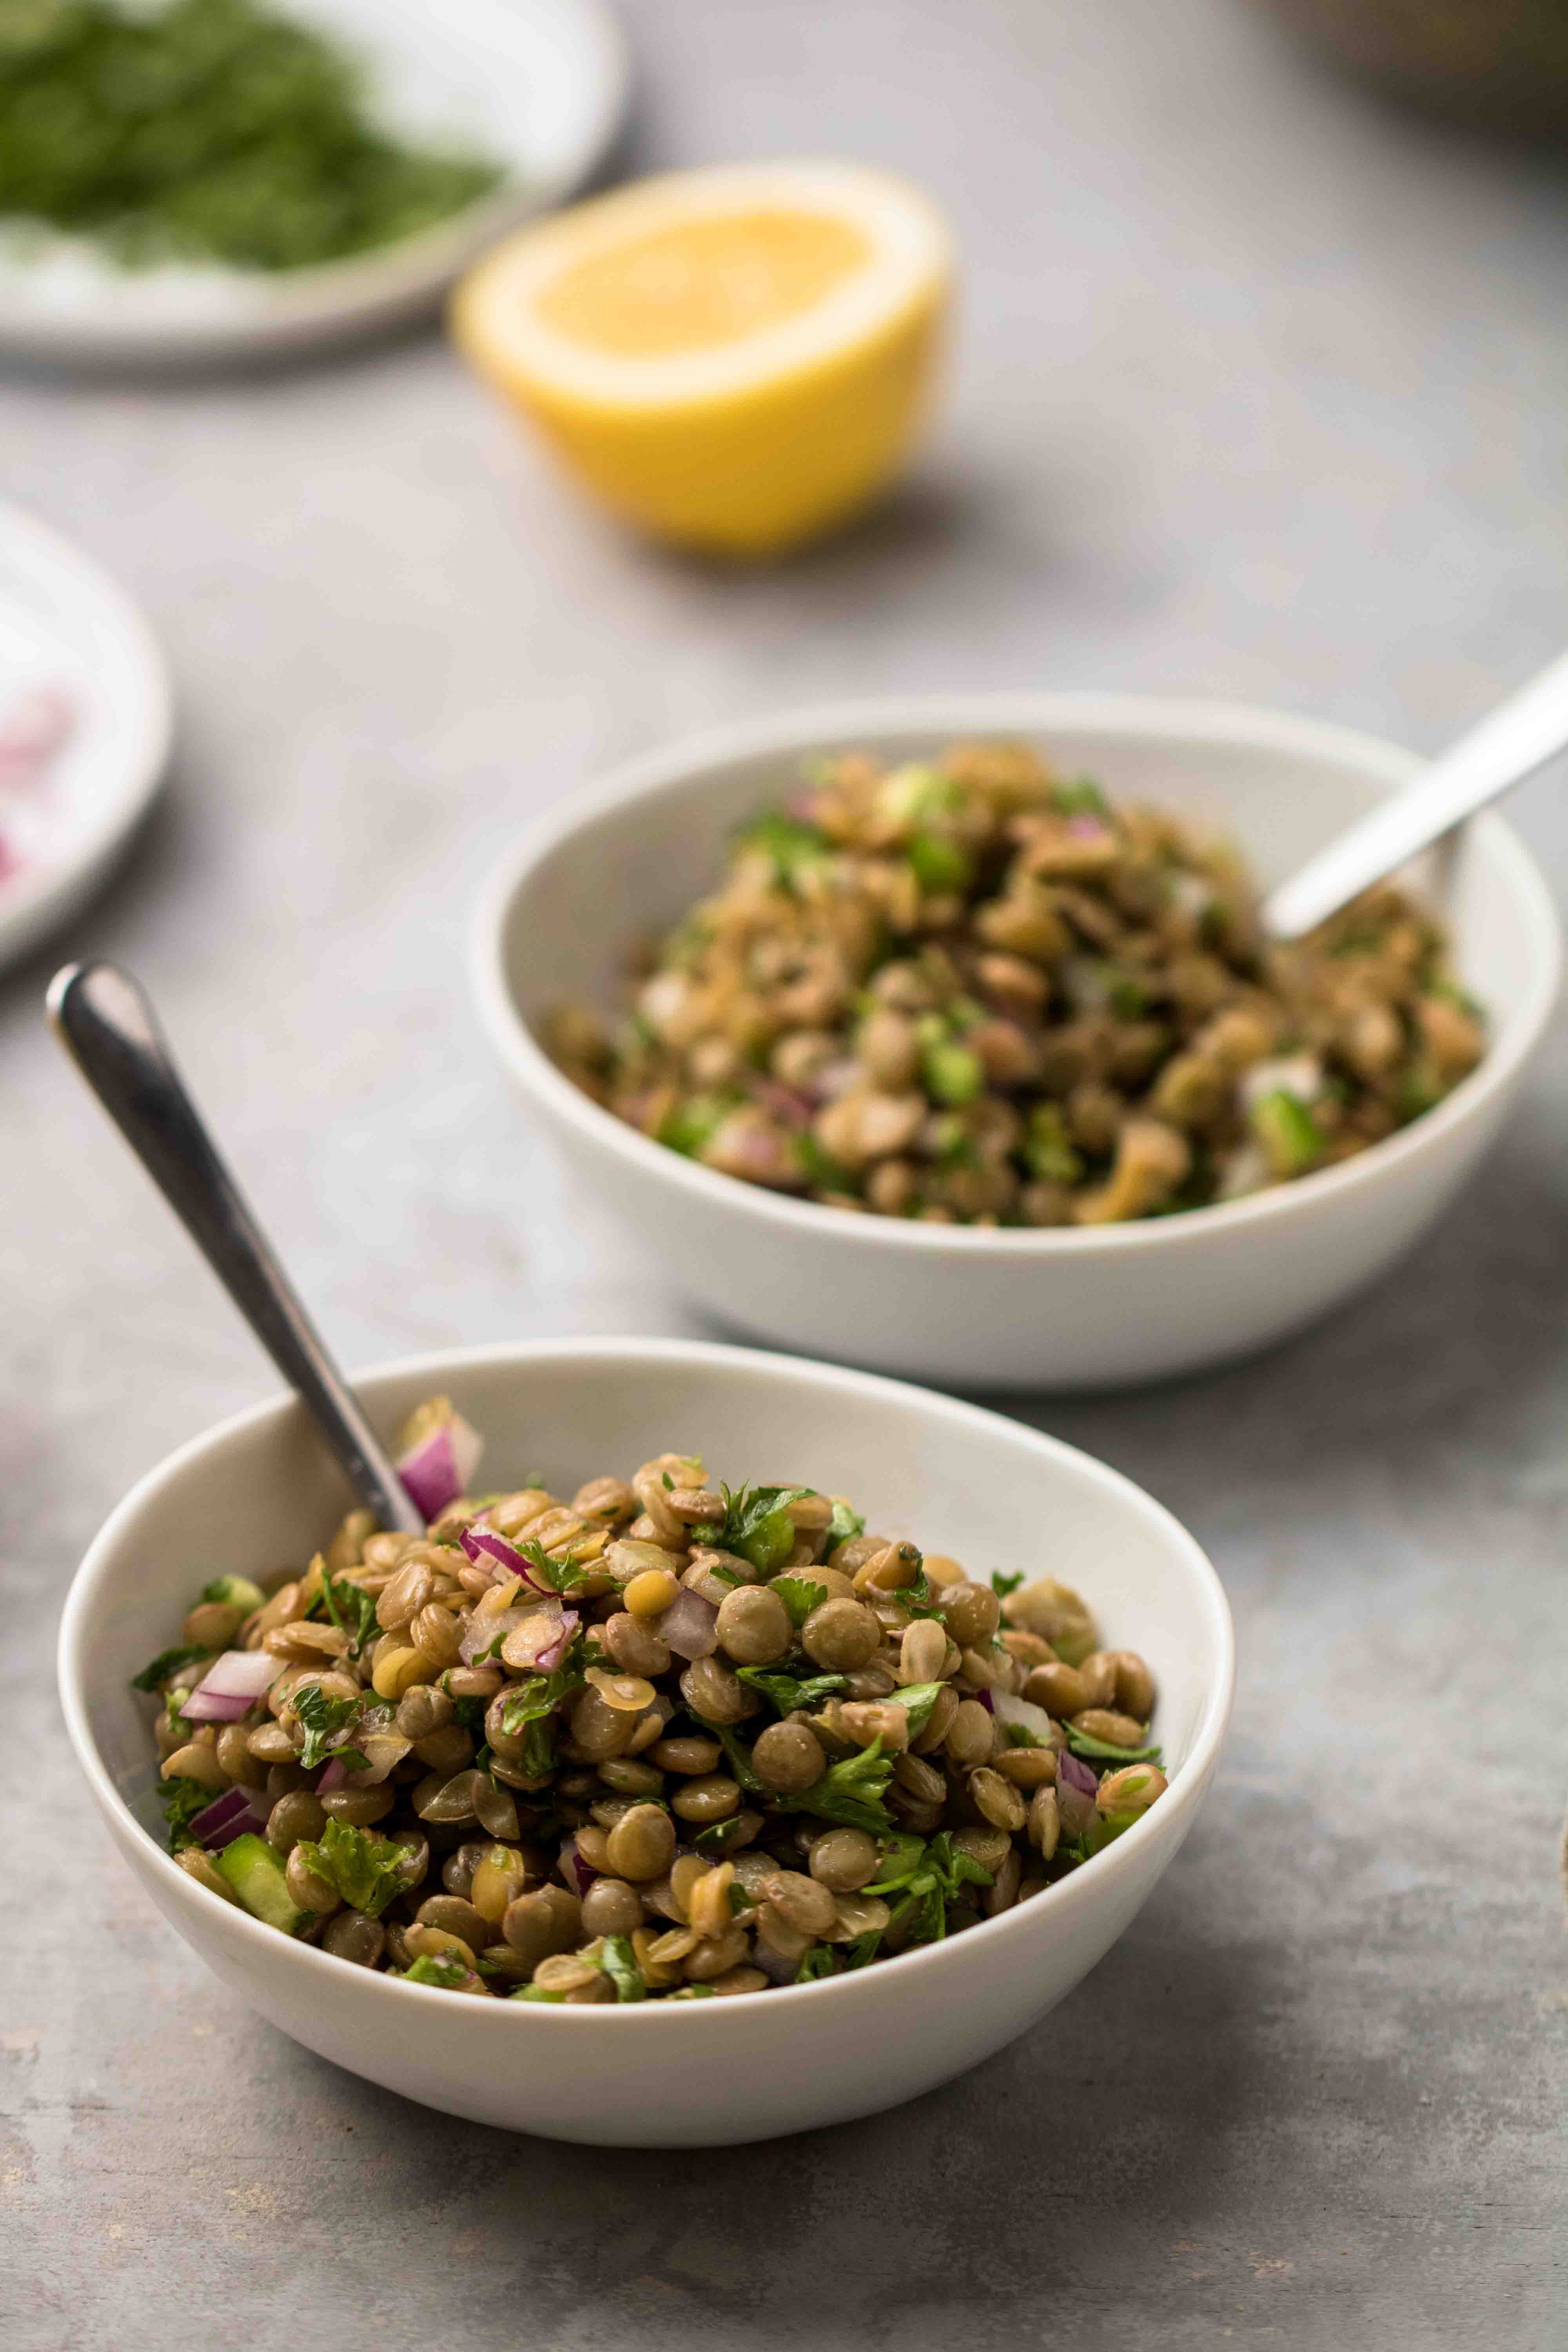 A Quick and Healthy Mediterranean Lentil Salad | Lifestyle of a Foodie